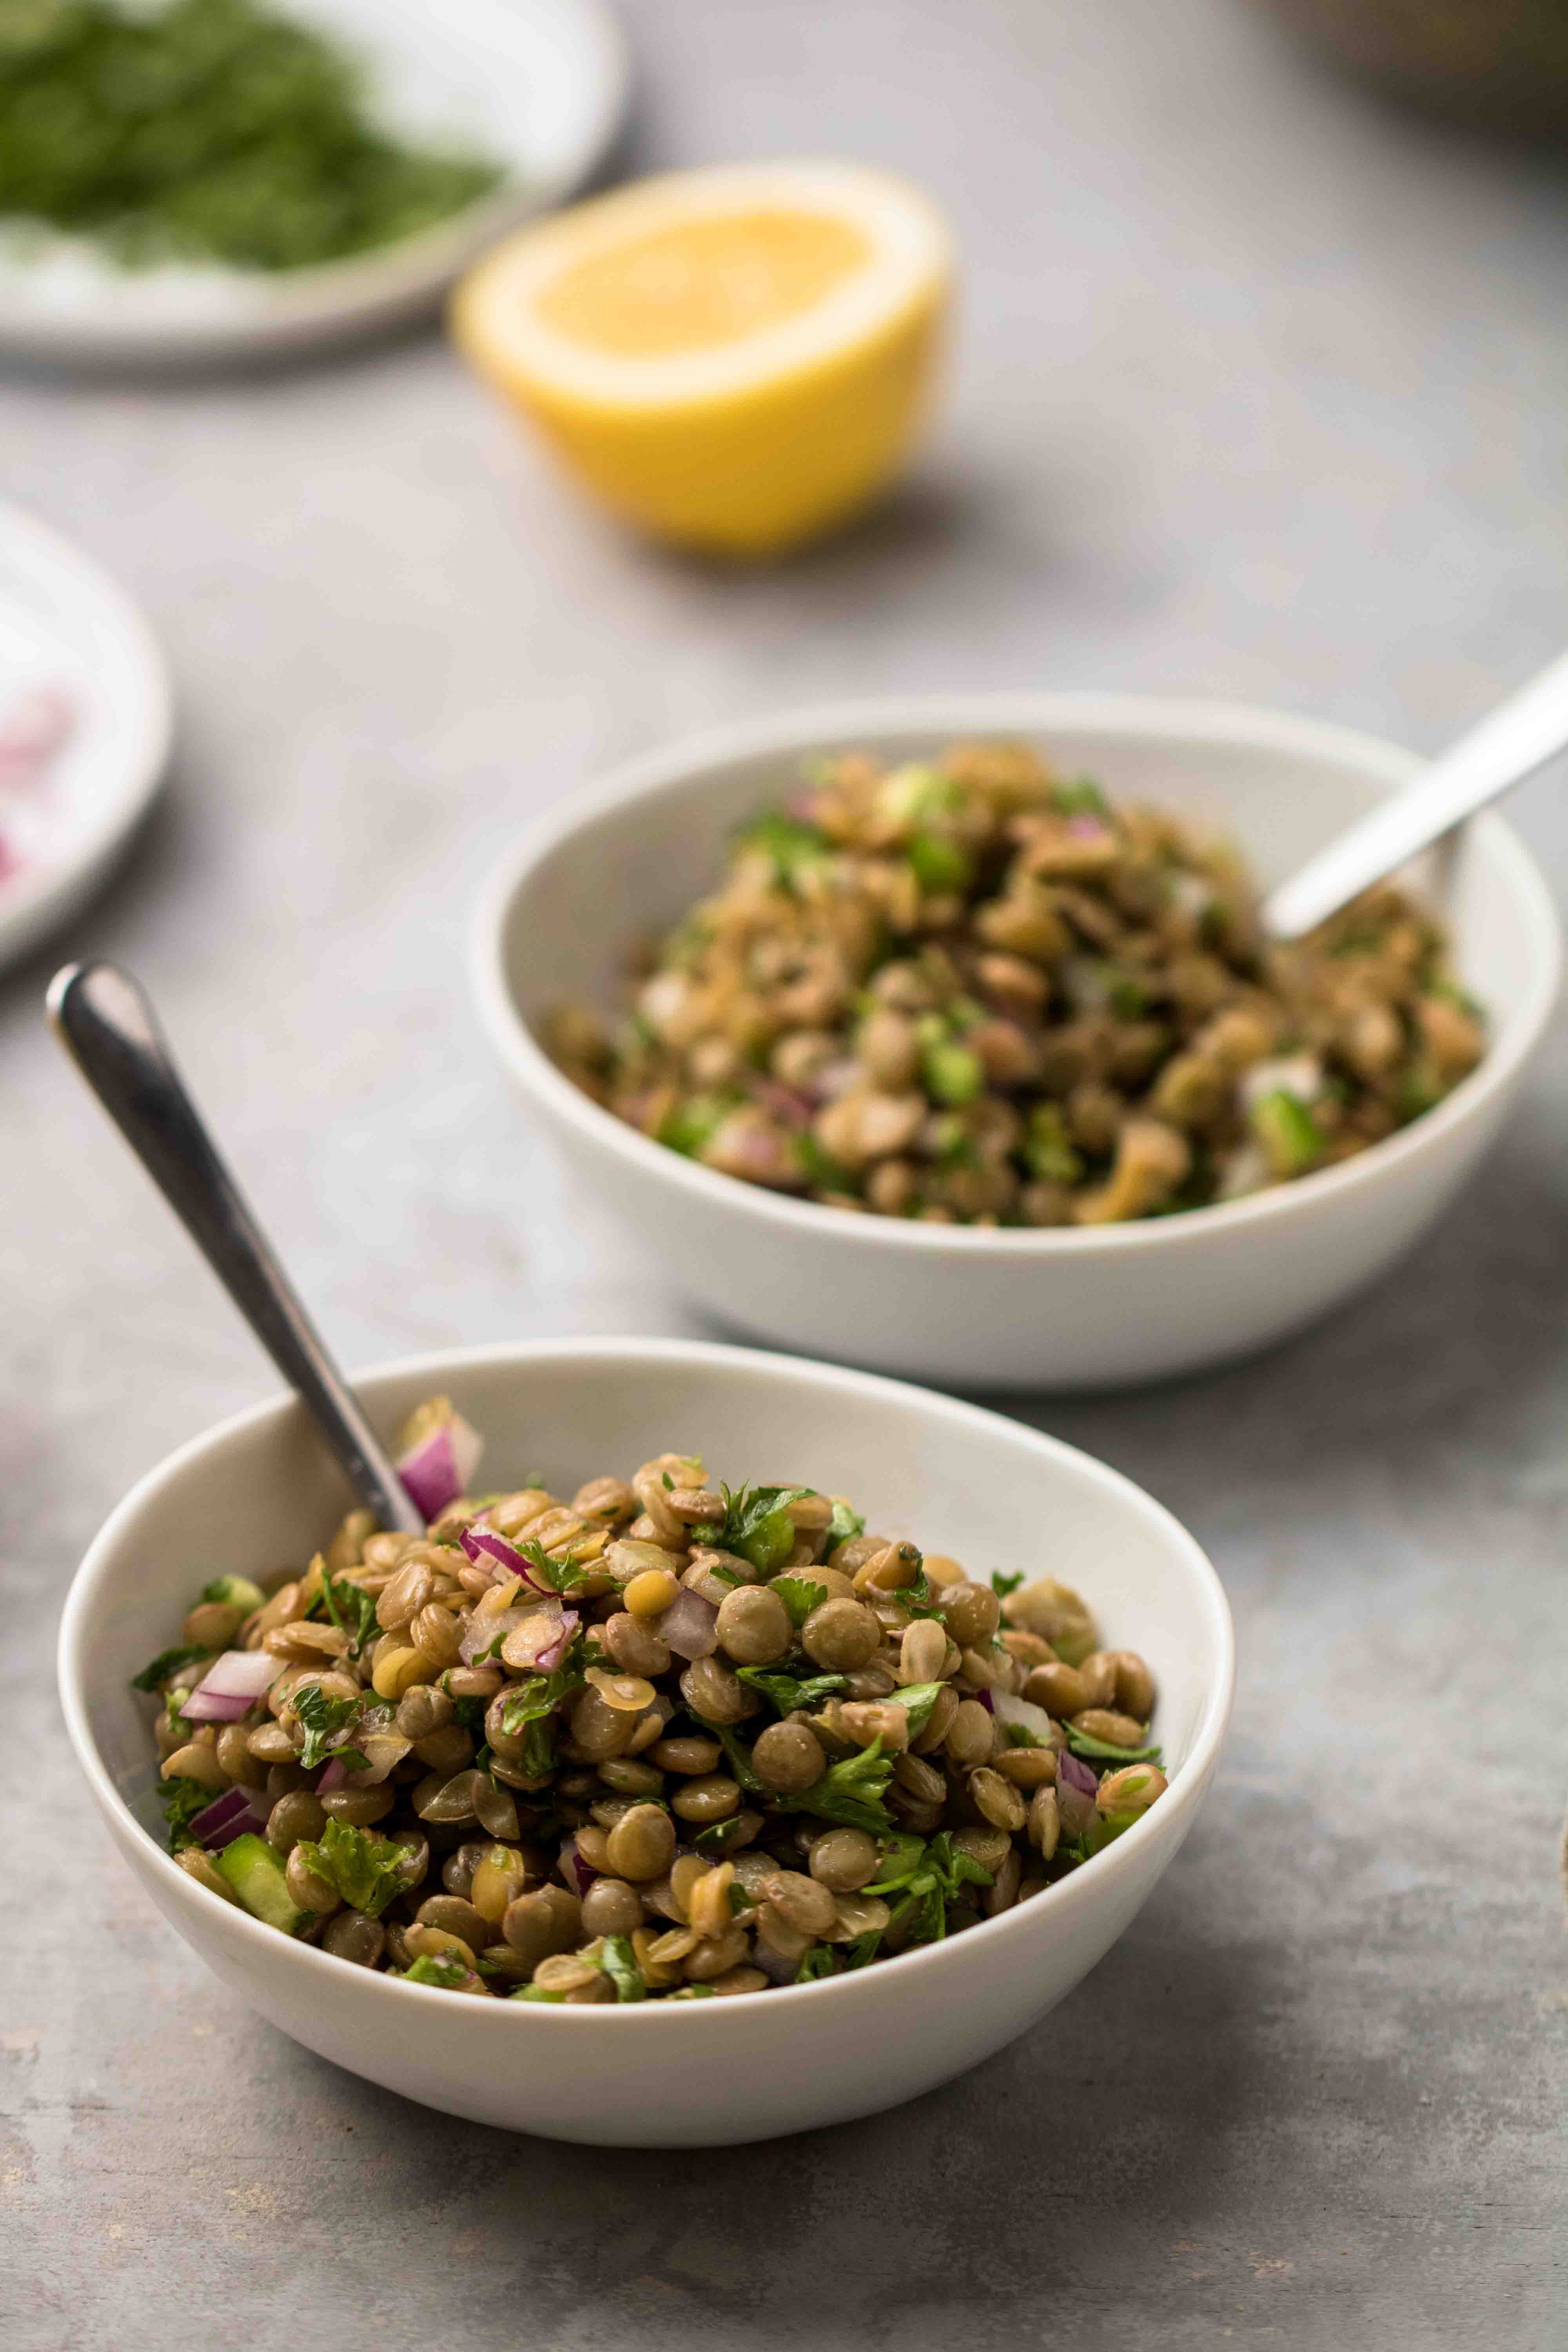 A Quick and Healthy Mediterranean Lentil Salad | Lifestyle of a Foodie